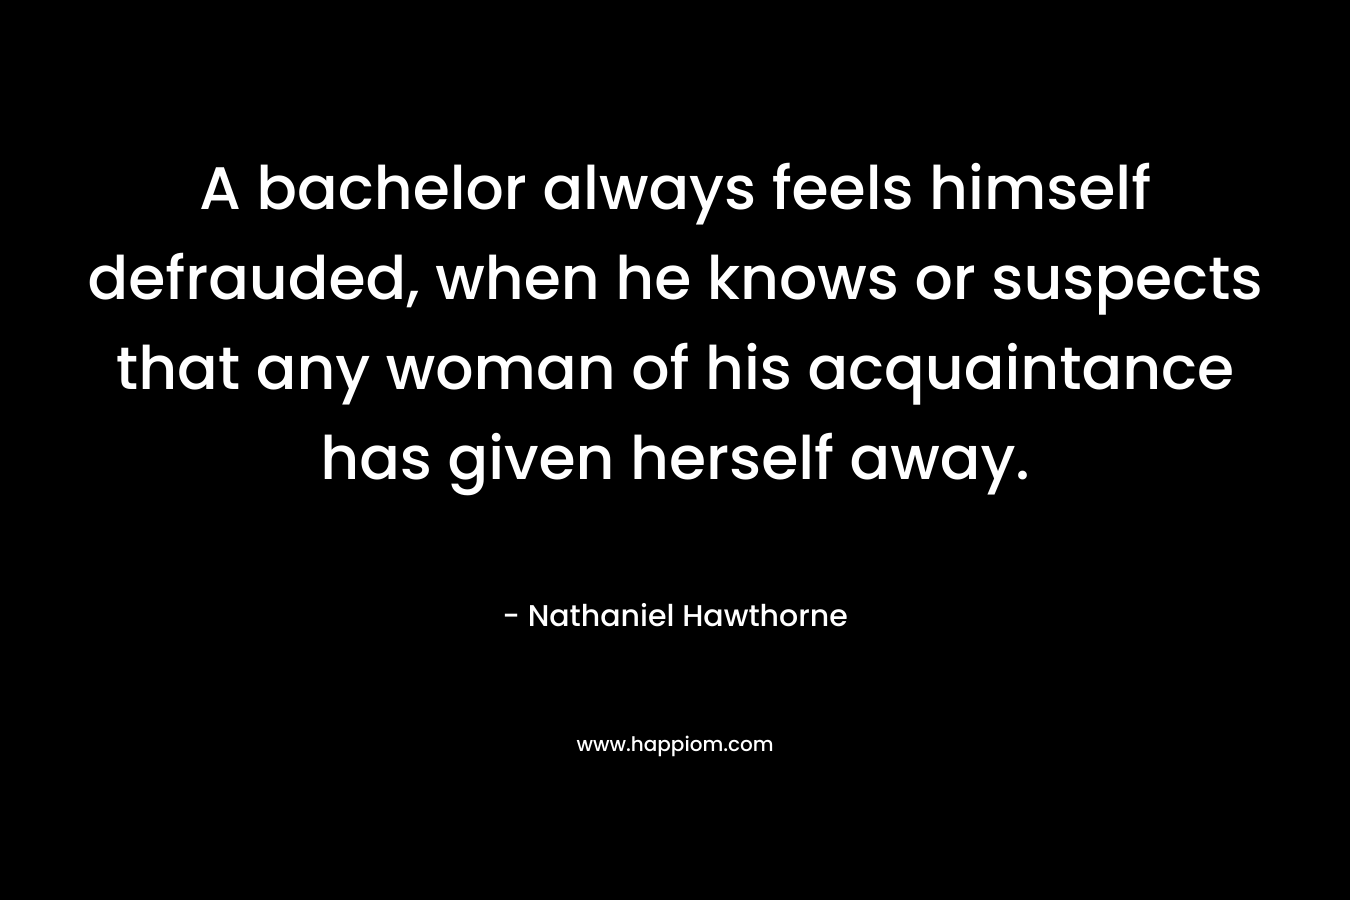 A bachelor always feels himself defrauded, when he knows or suspects that any woman of his acquaintance has given herself away. – Nathaniel Hawthorne